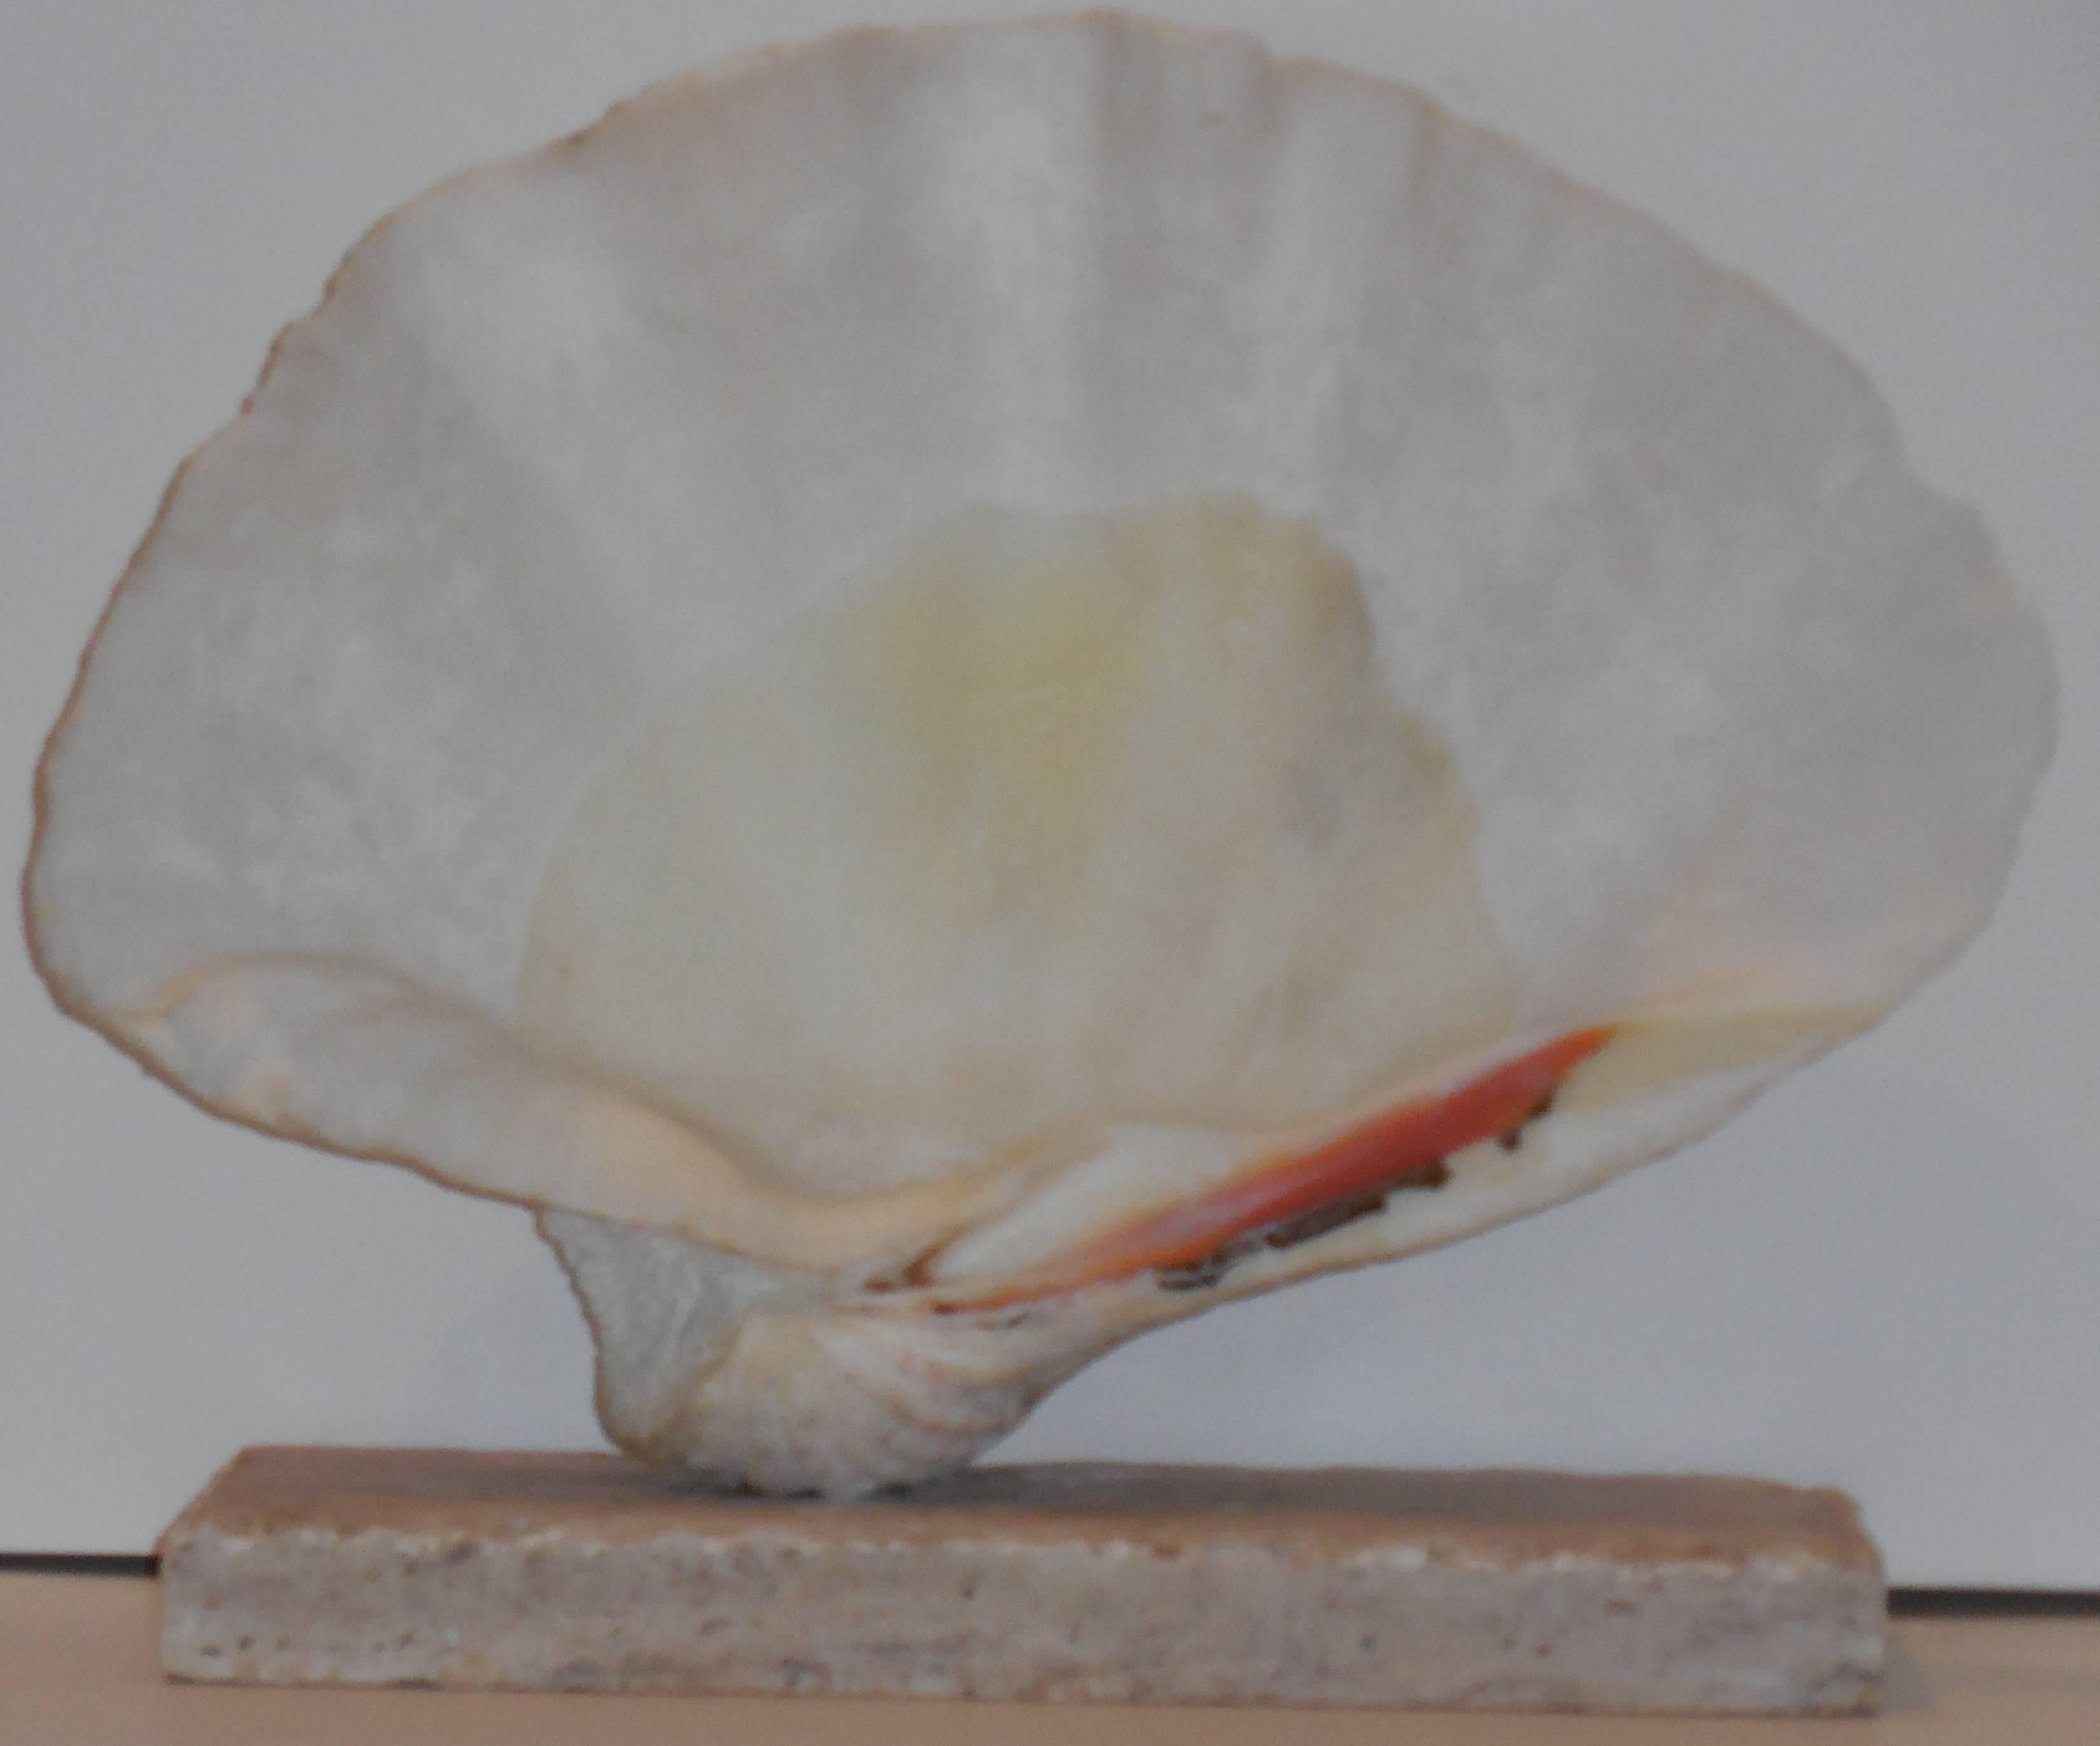 Elegant clam shell professionally mounted on coral base, great decorative piece for the room.
Base size: 6" x 12" x 1